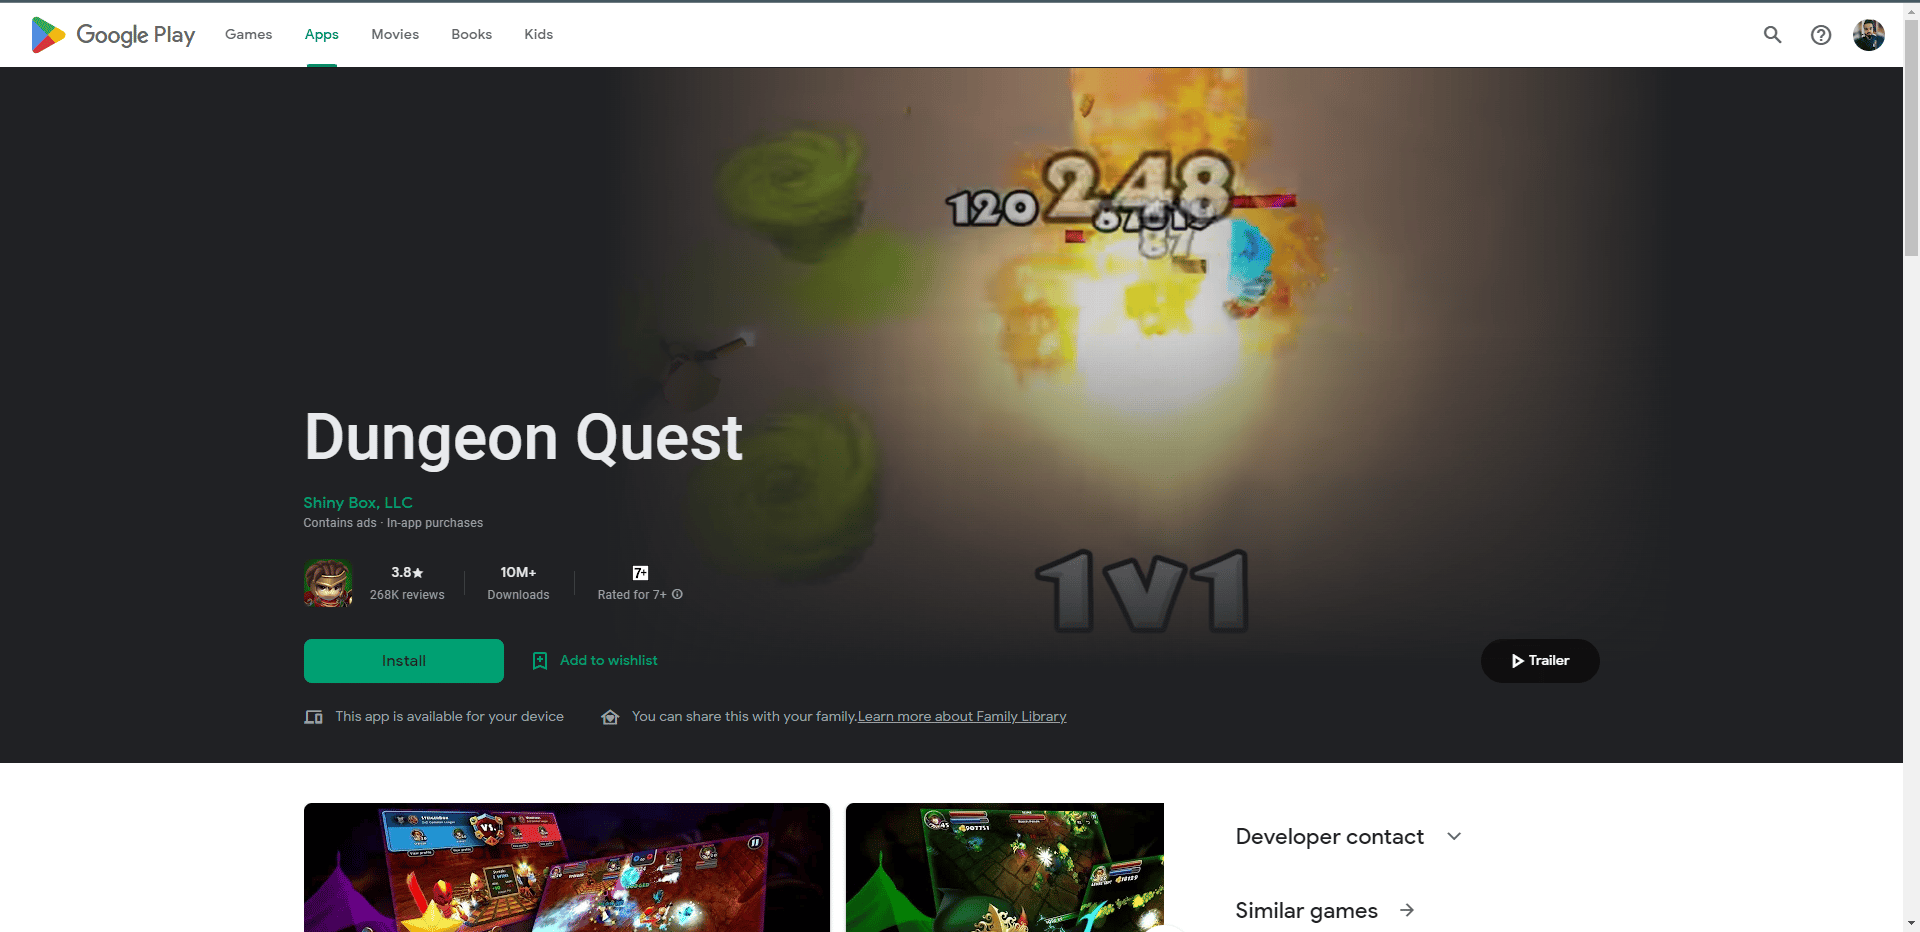 Dungeon Quest Play Store webpage